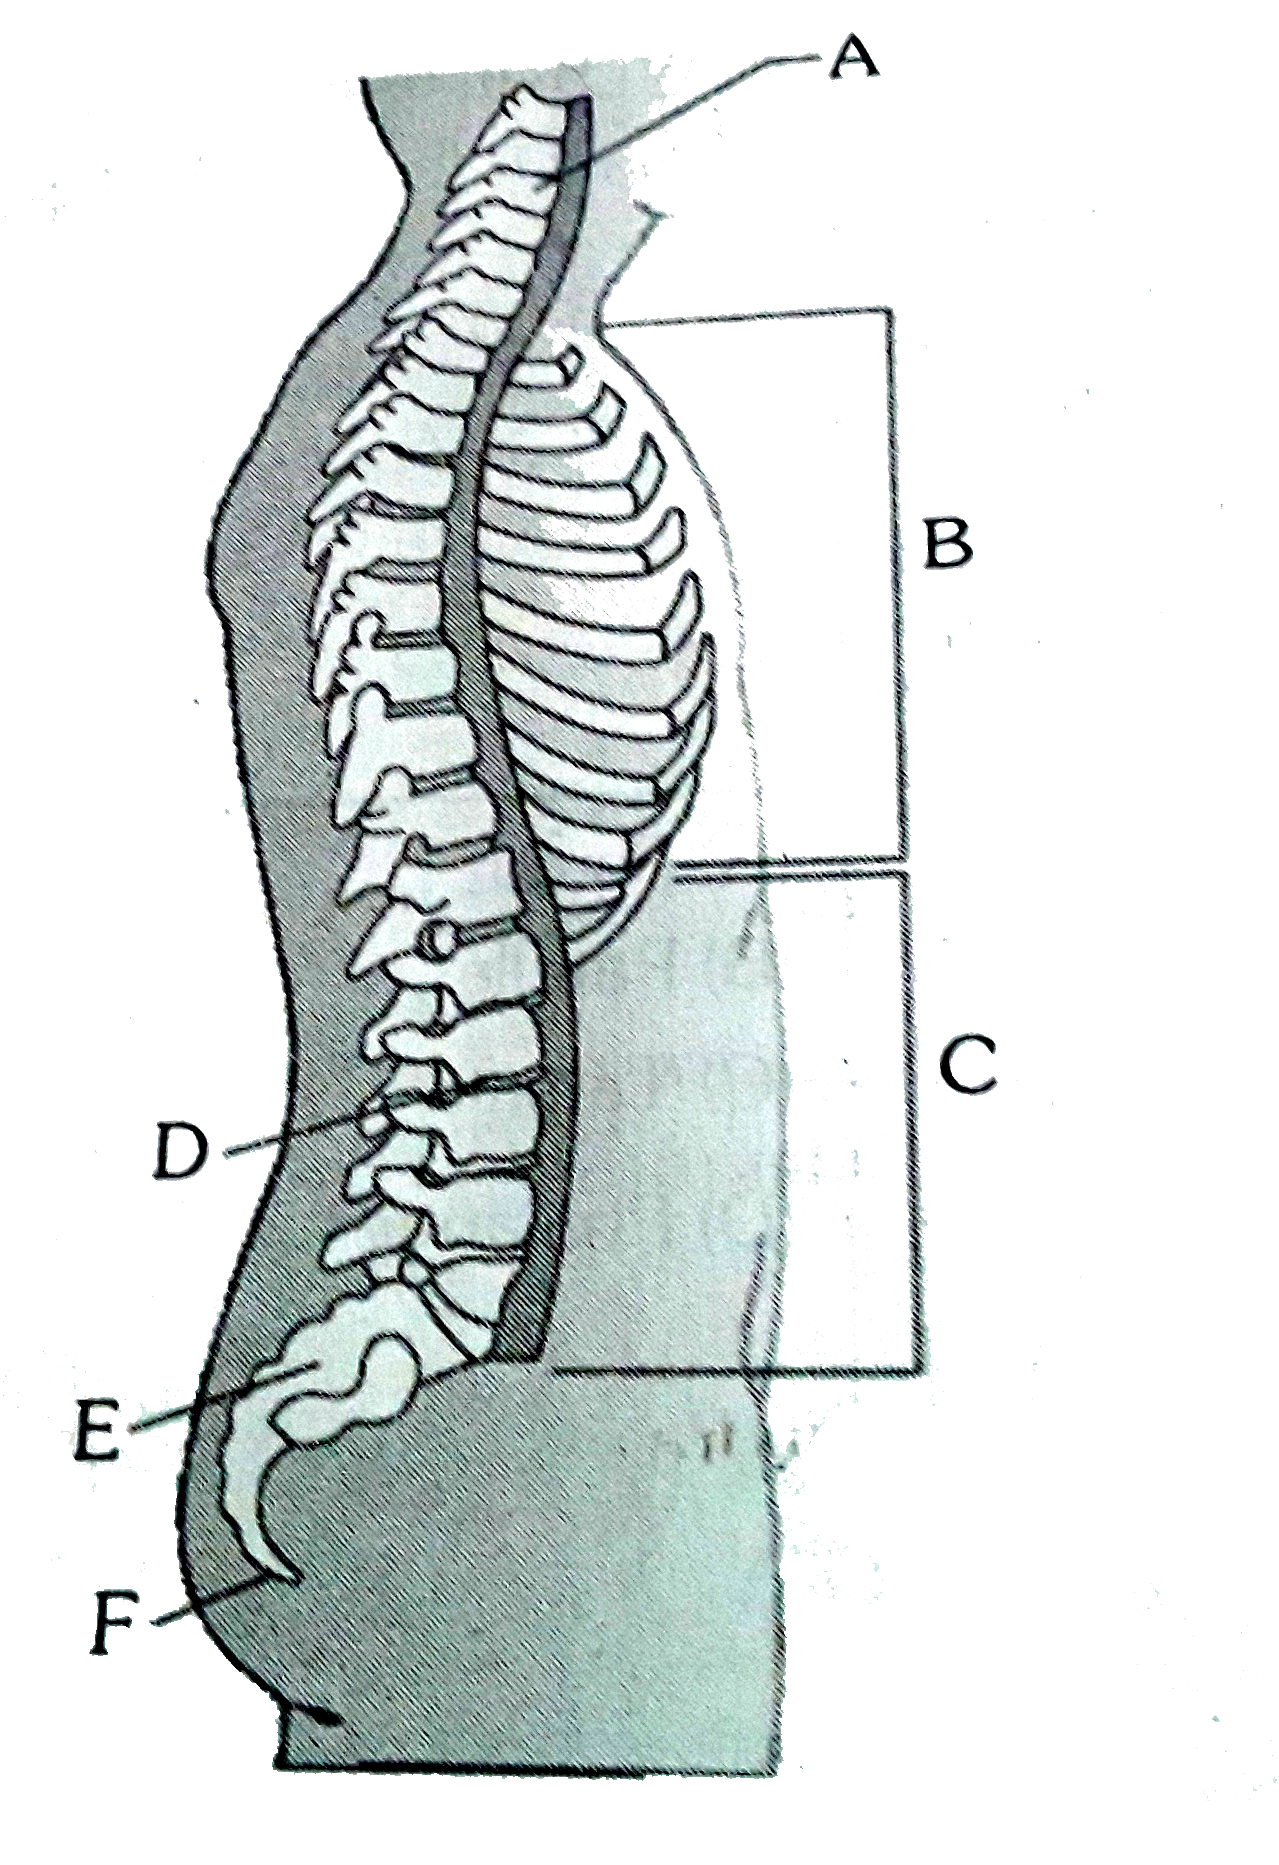 Idenfity thhe labelling A,B,C,D,E and F in the given diagra of vertebral column